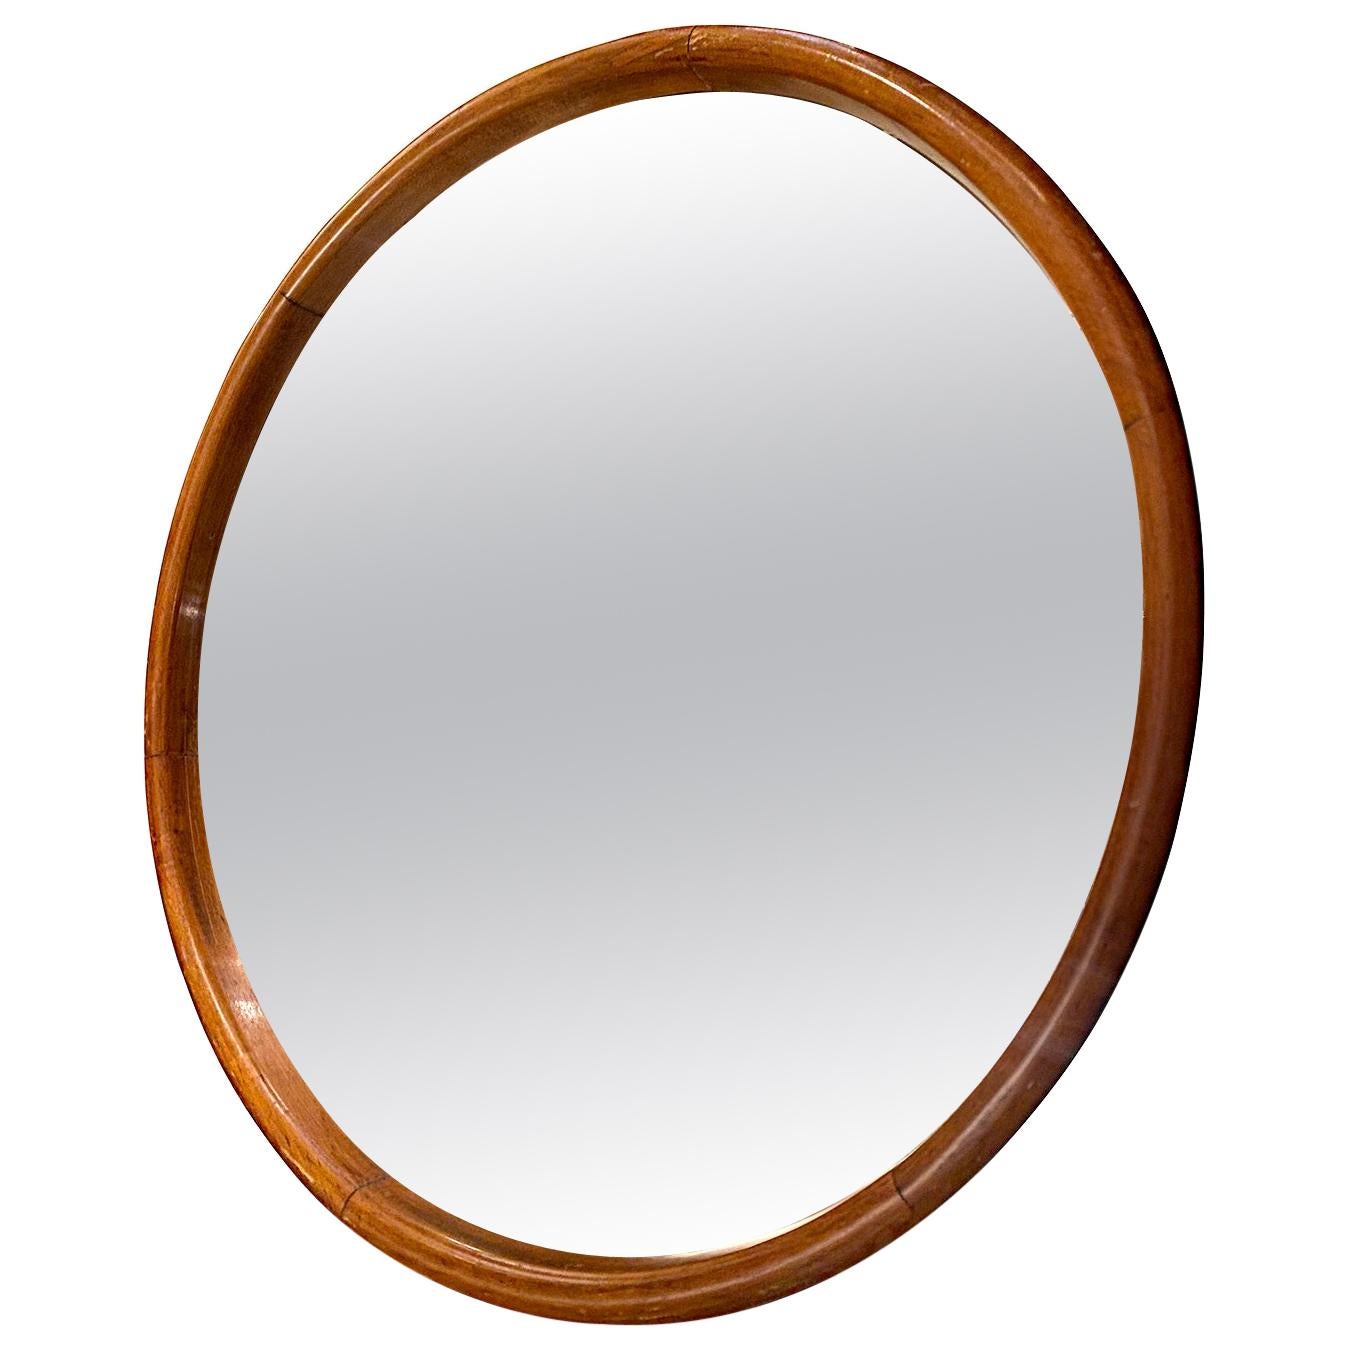 English Round Wooden Frame Mirror For Sale